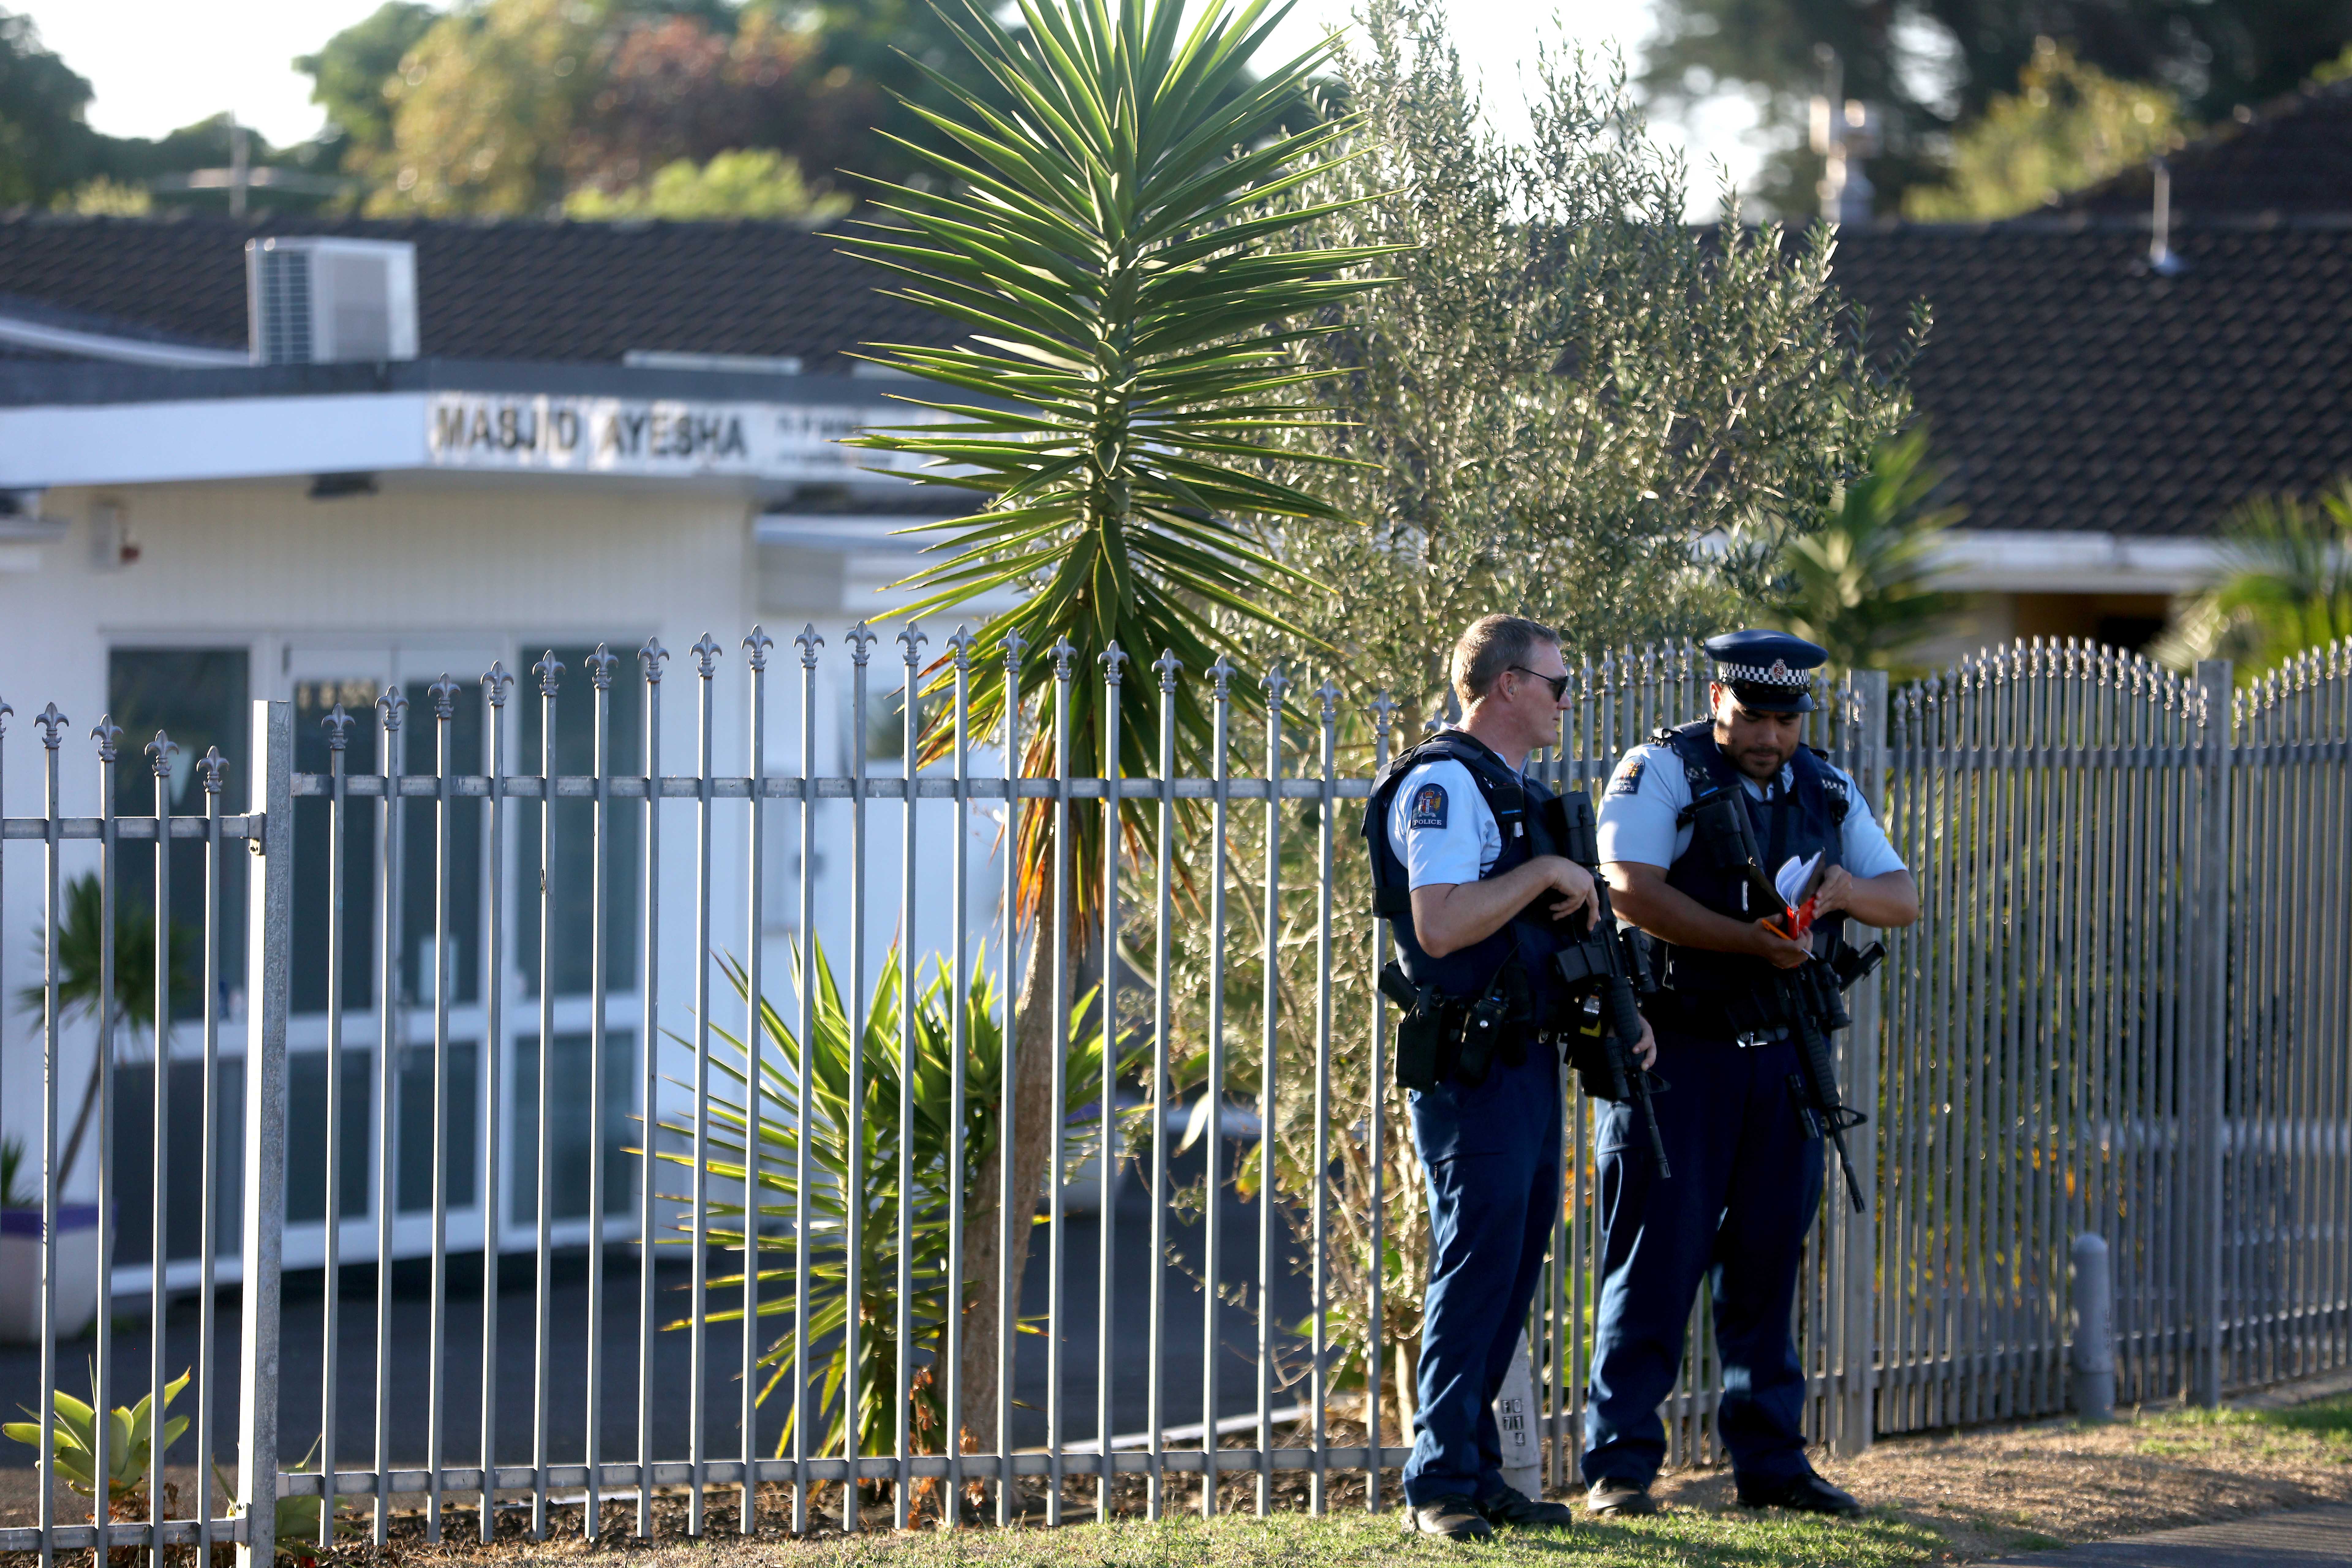  Armed police maintain a presence outside the Masijd Ayesha Mosque in Manurewa on March 15.